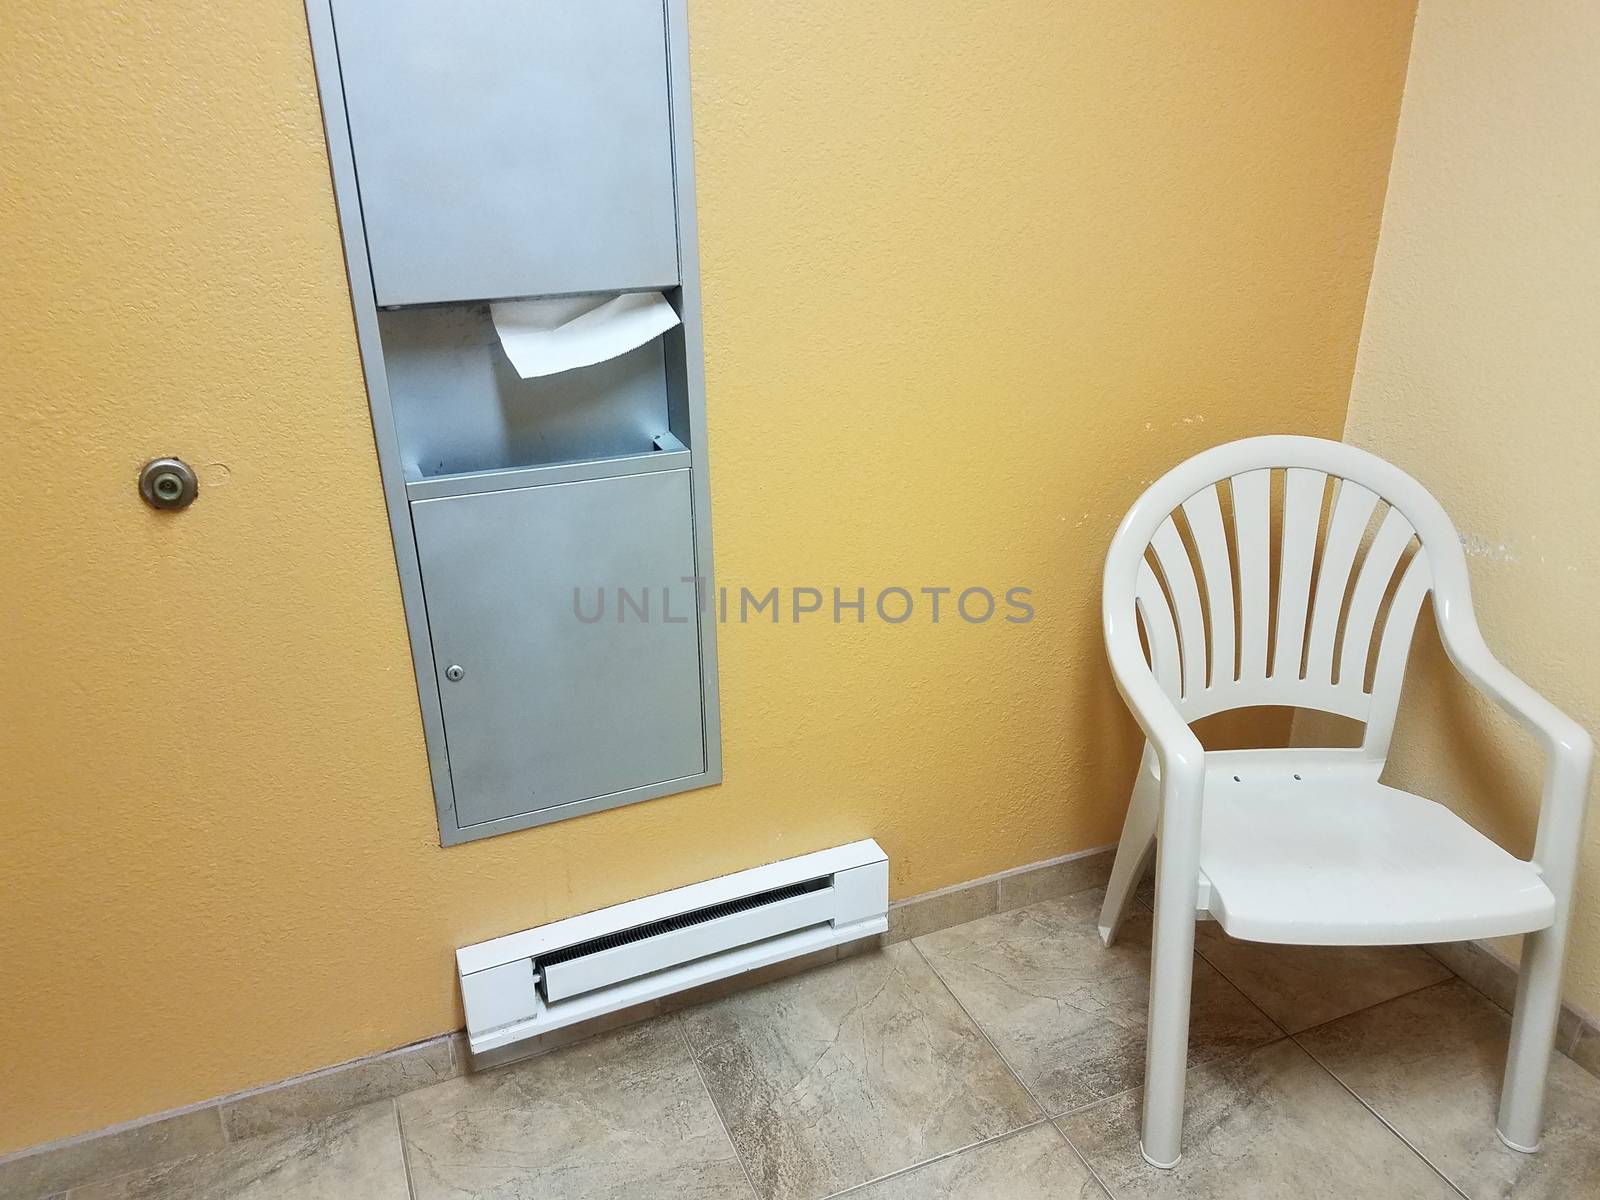 heater with paper towel dispenser and chair in bathroom by stockphotofan1